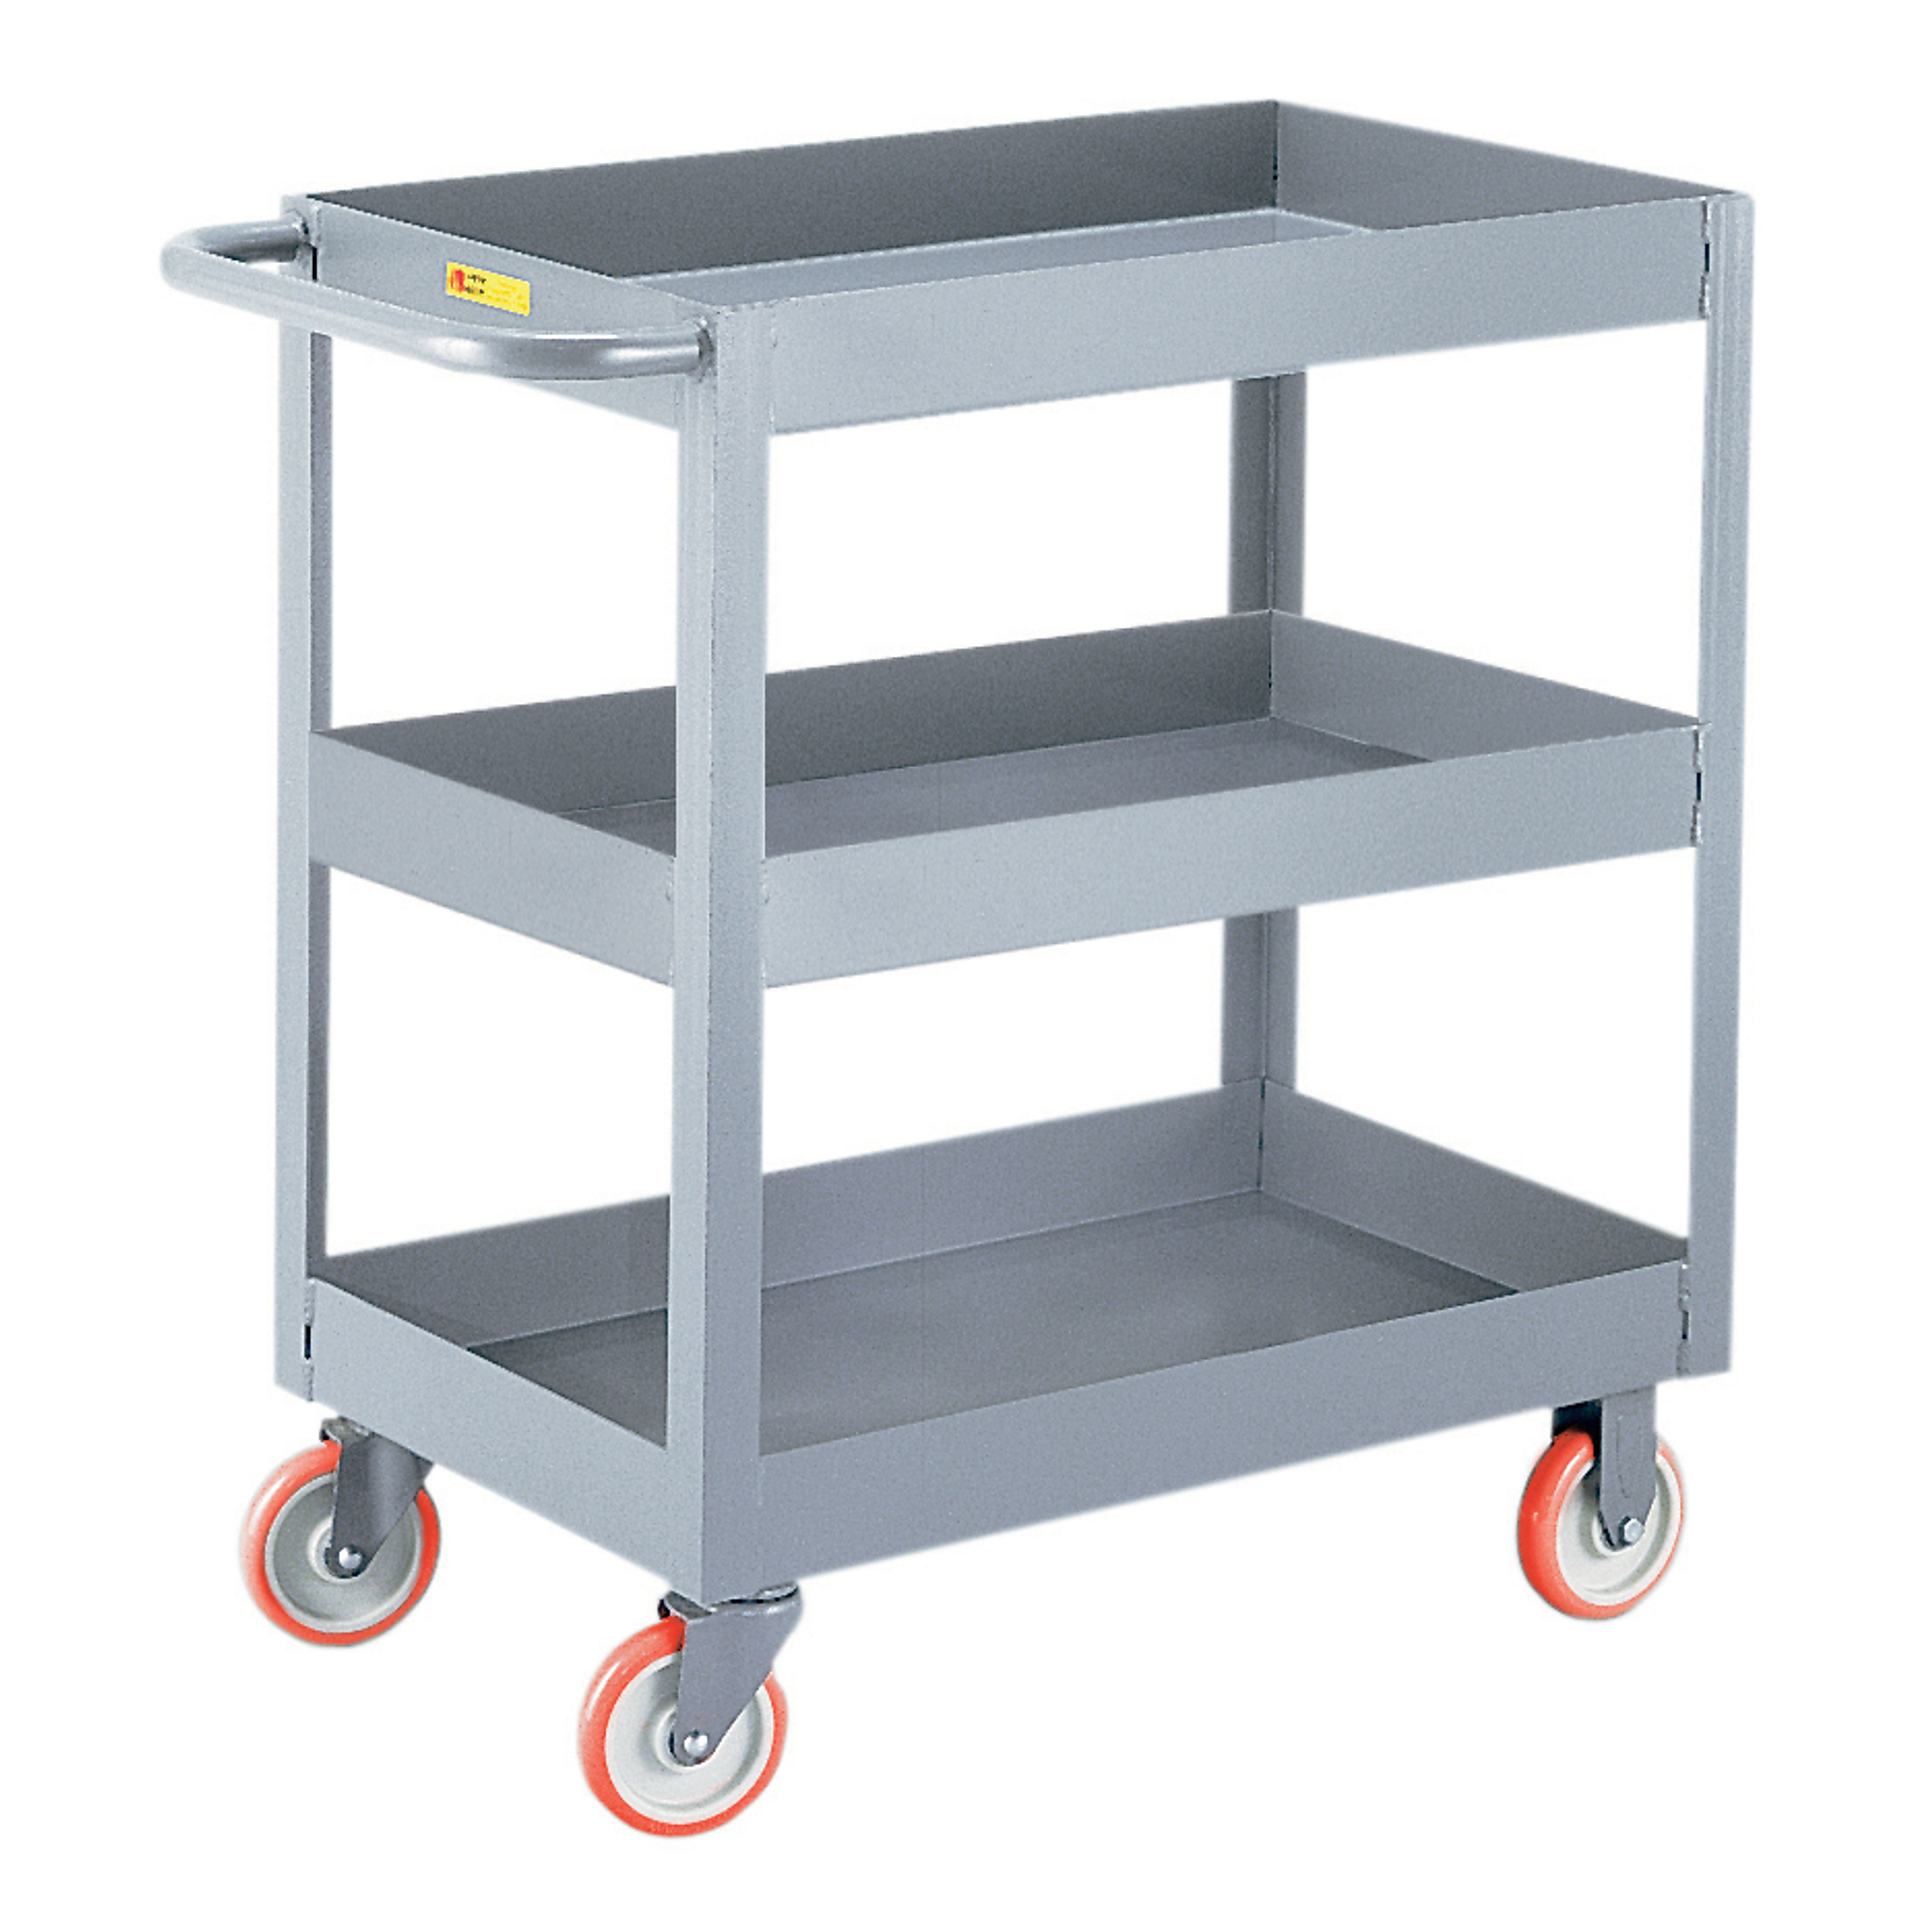 Little Giant, 3Inch Deep Shelf Truck, 18x30, 1200 lbs, Total Capacity 1200 lb, Shelves (qty.) 3, Material Carbon Steel, Model 3DS1830X3-5PY